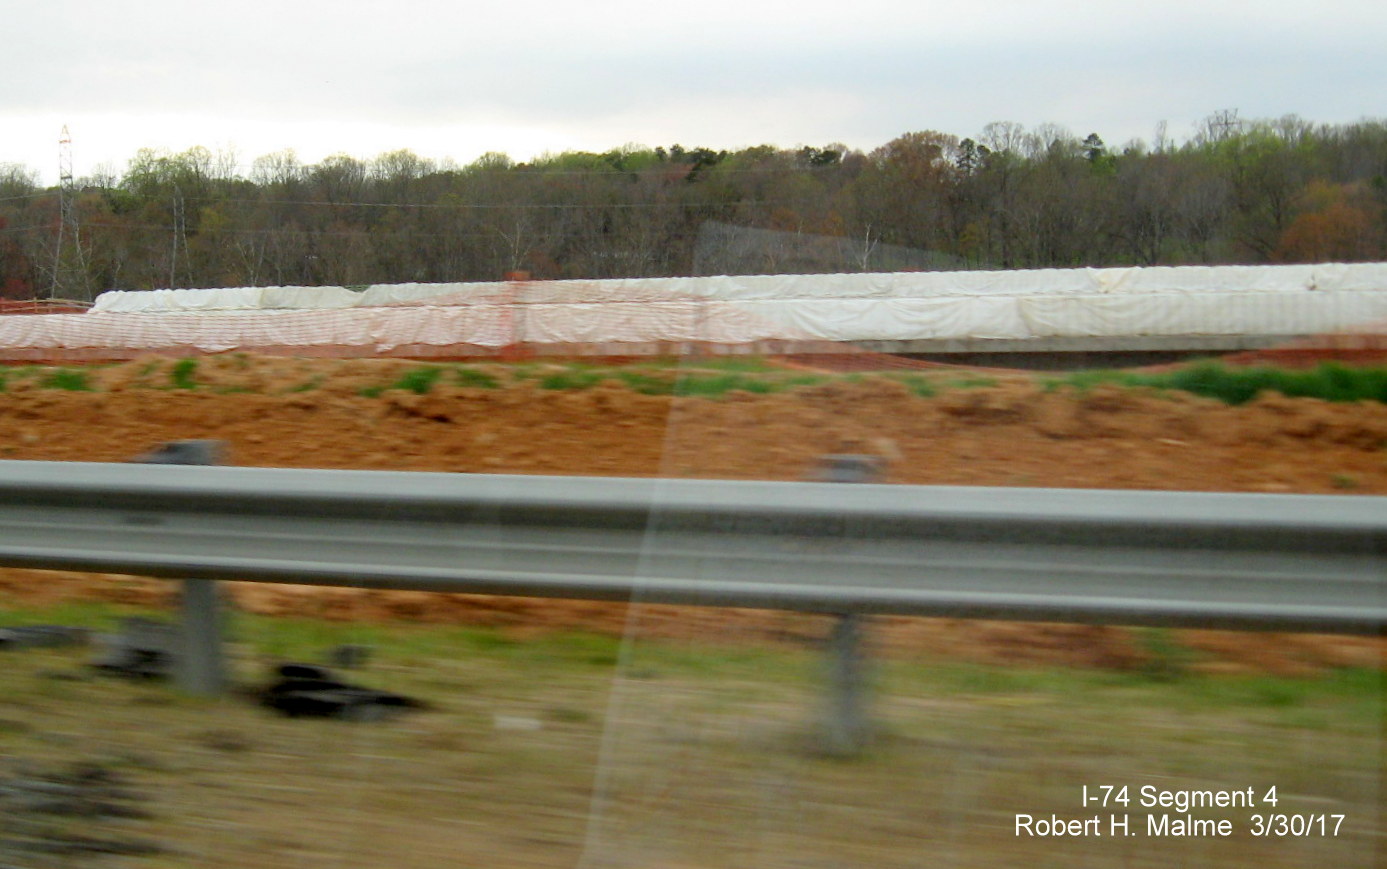 Image of construction to north of US 158 in I-74/Beltway construction zone in Winston-Salem